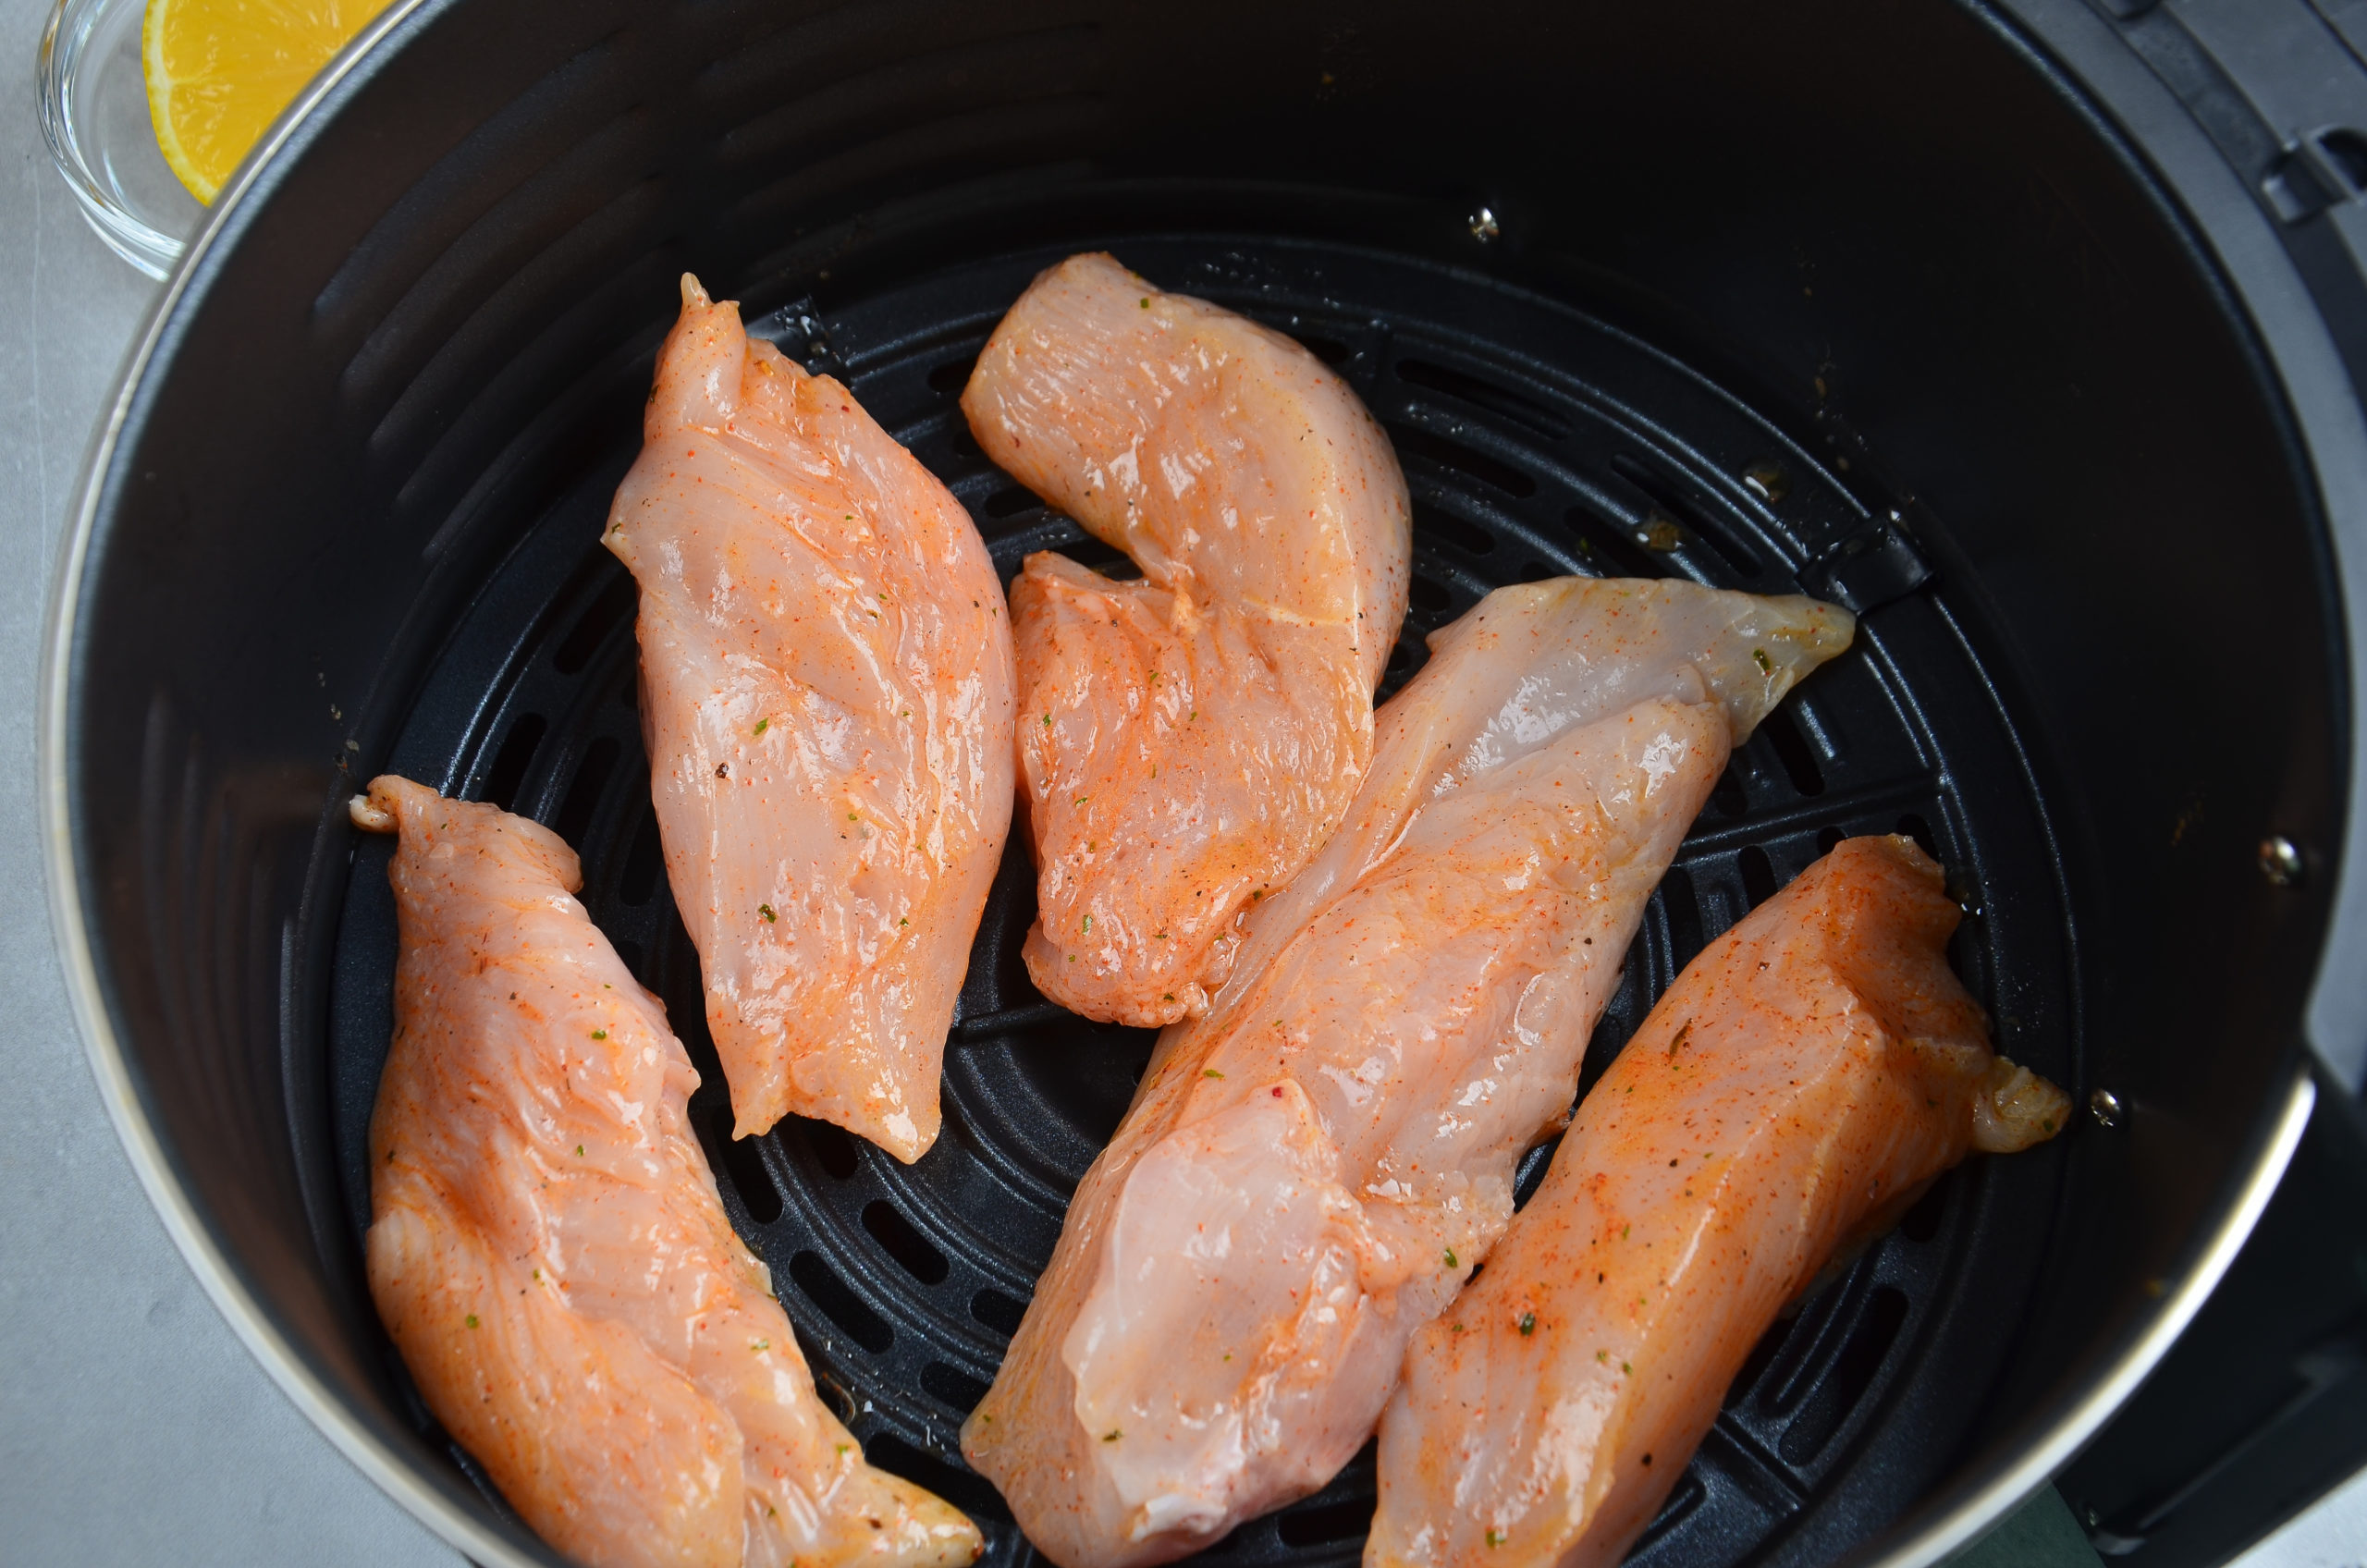 Strips of marinated chicken in an air fryer